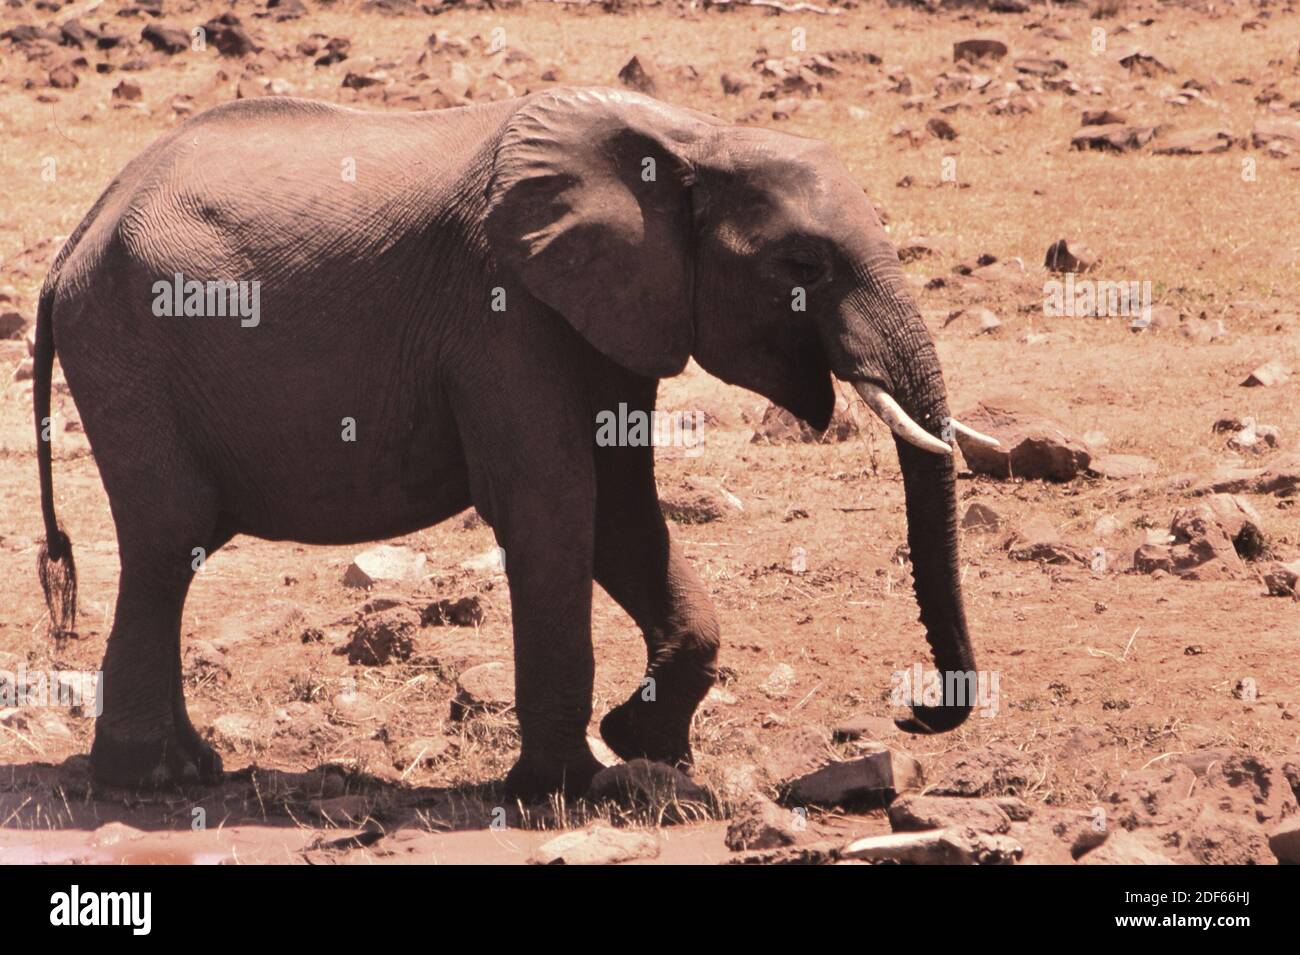 At the time picture taken, elephants were NOT an endangered species, but were too numerous. Stock Photo